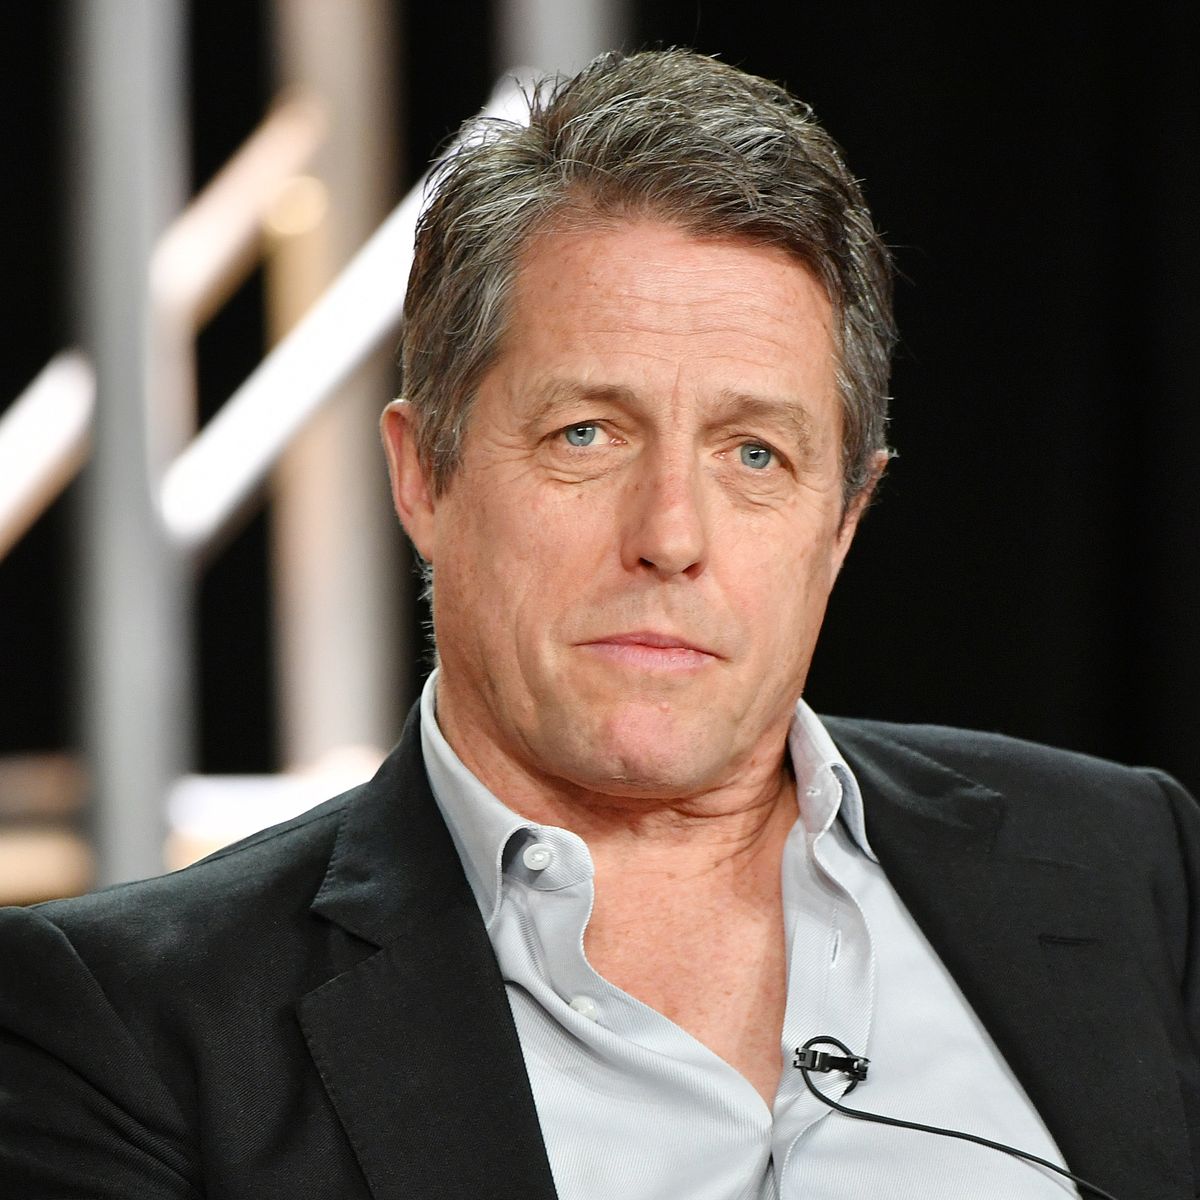 2020 Winter TCA Tour - Day 9 PASADENA, CALIFORNIA - JANUARY 15: Hugh Grant of "The Undoing" speaks during the HBO segment of the 2020 Winter TCA Press Tour at The Langham Huntington, Pasadena on January 15, 2020 in Pasadena, California. (Photo by Amy Sussman/Getty Images)